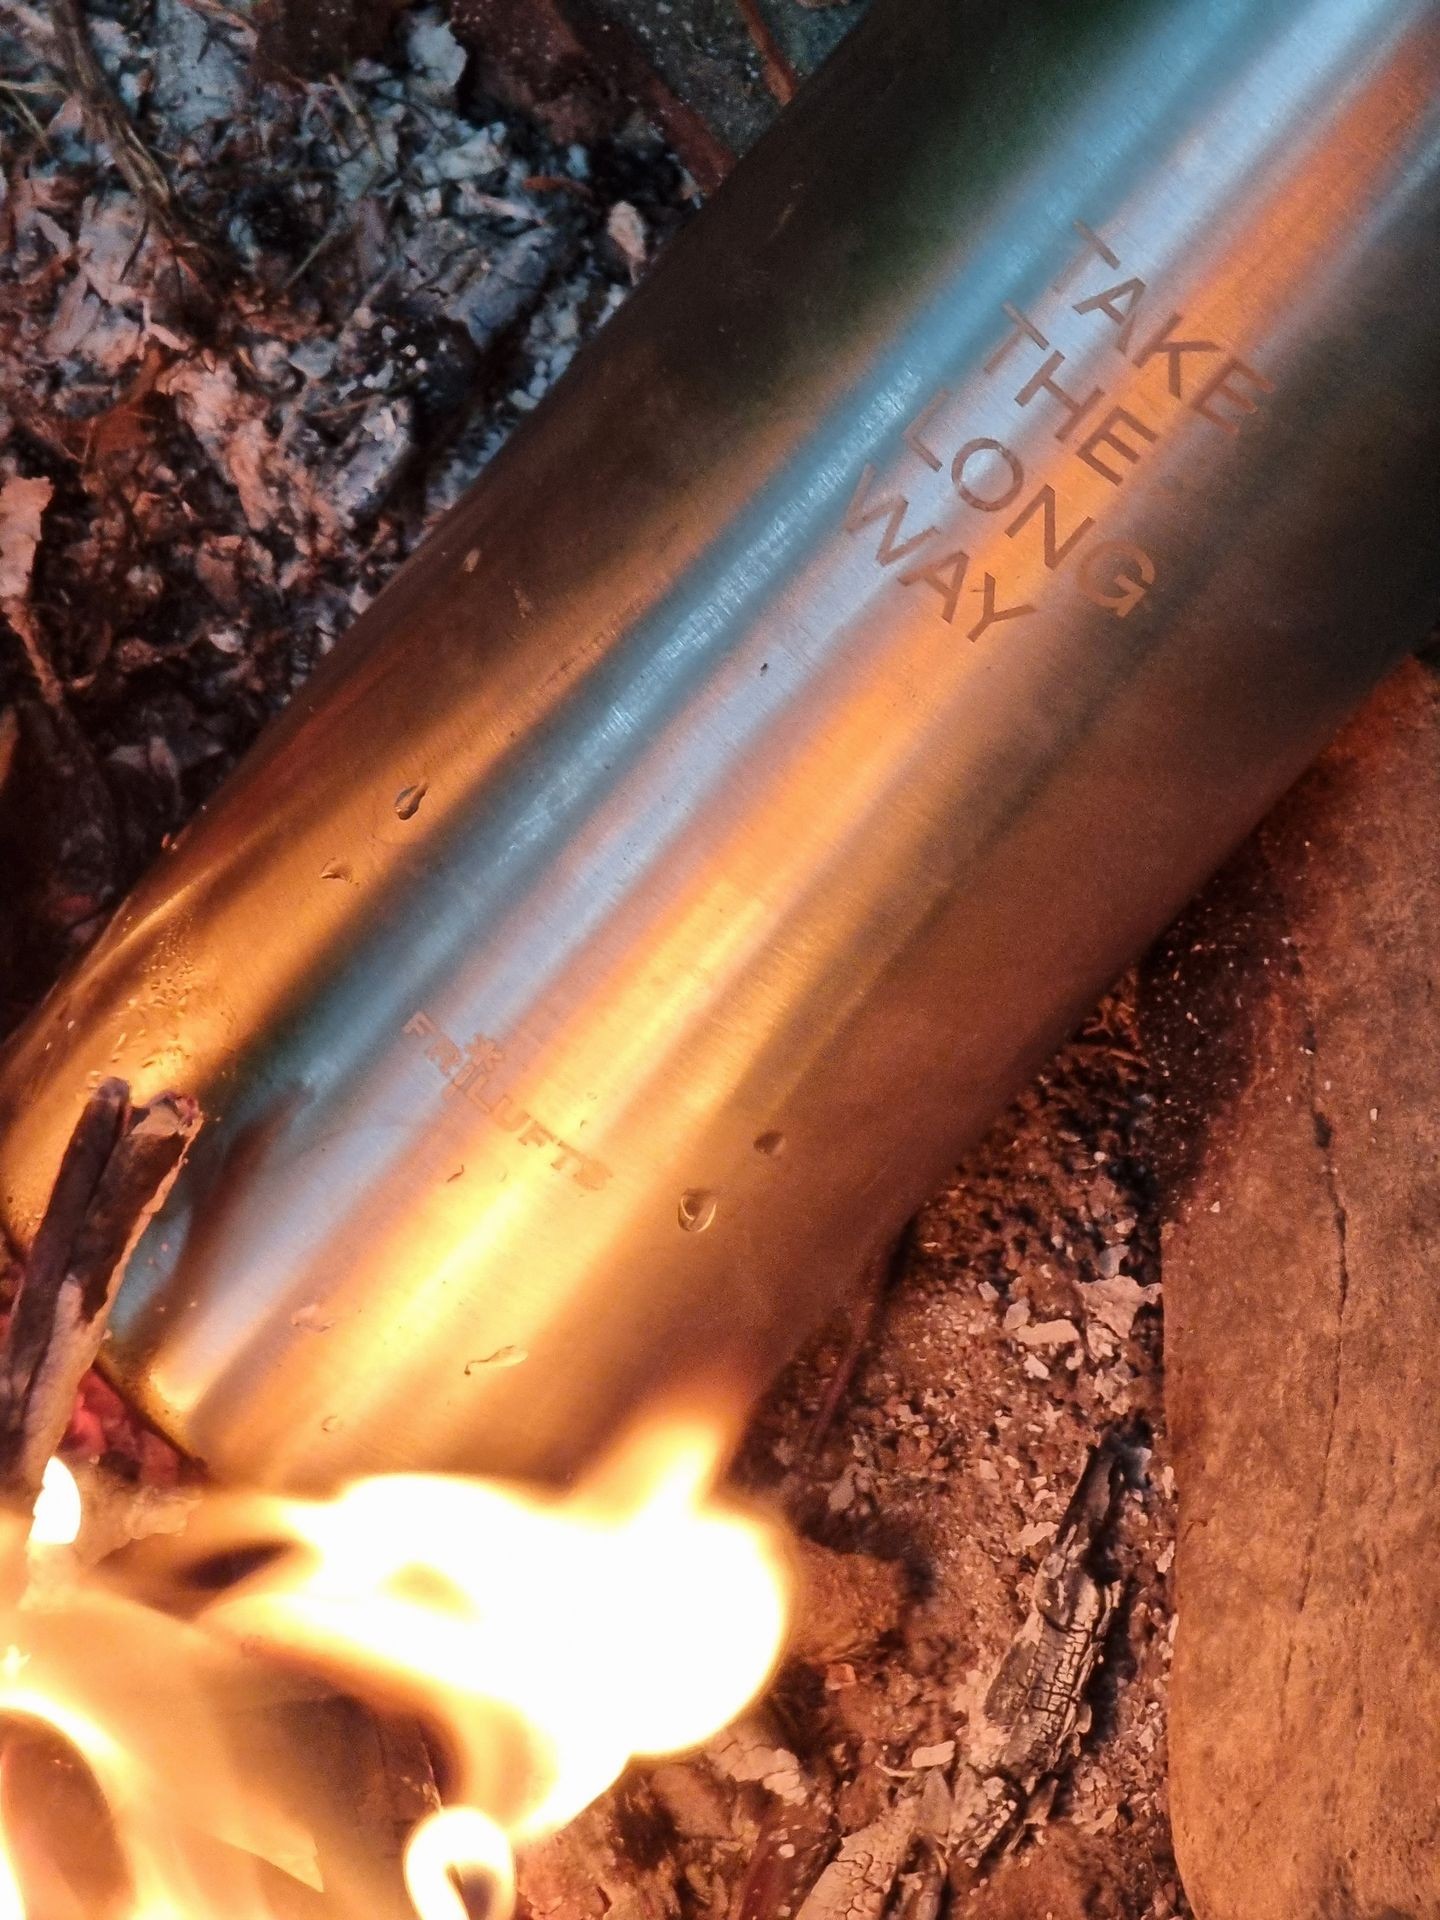 A thermo bottle in the fire, boiling water